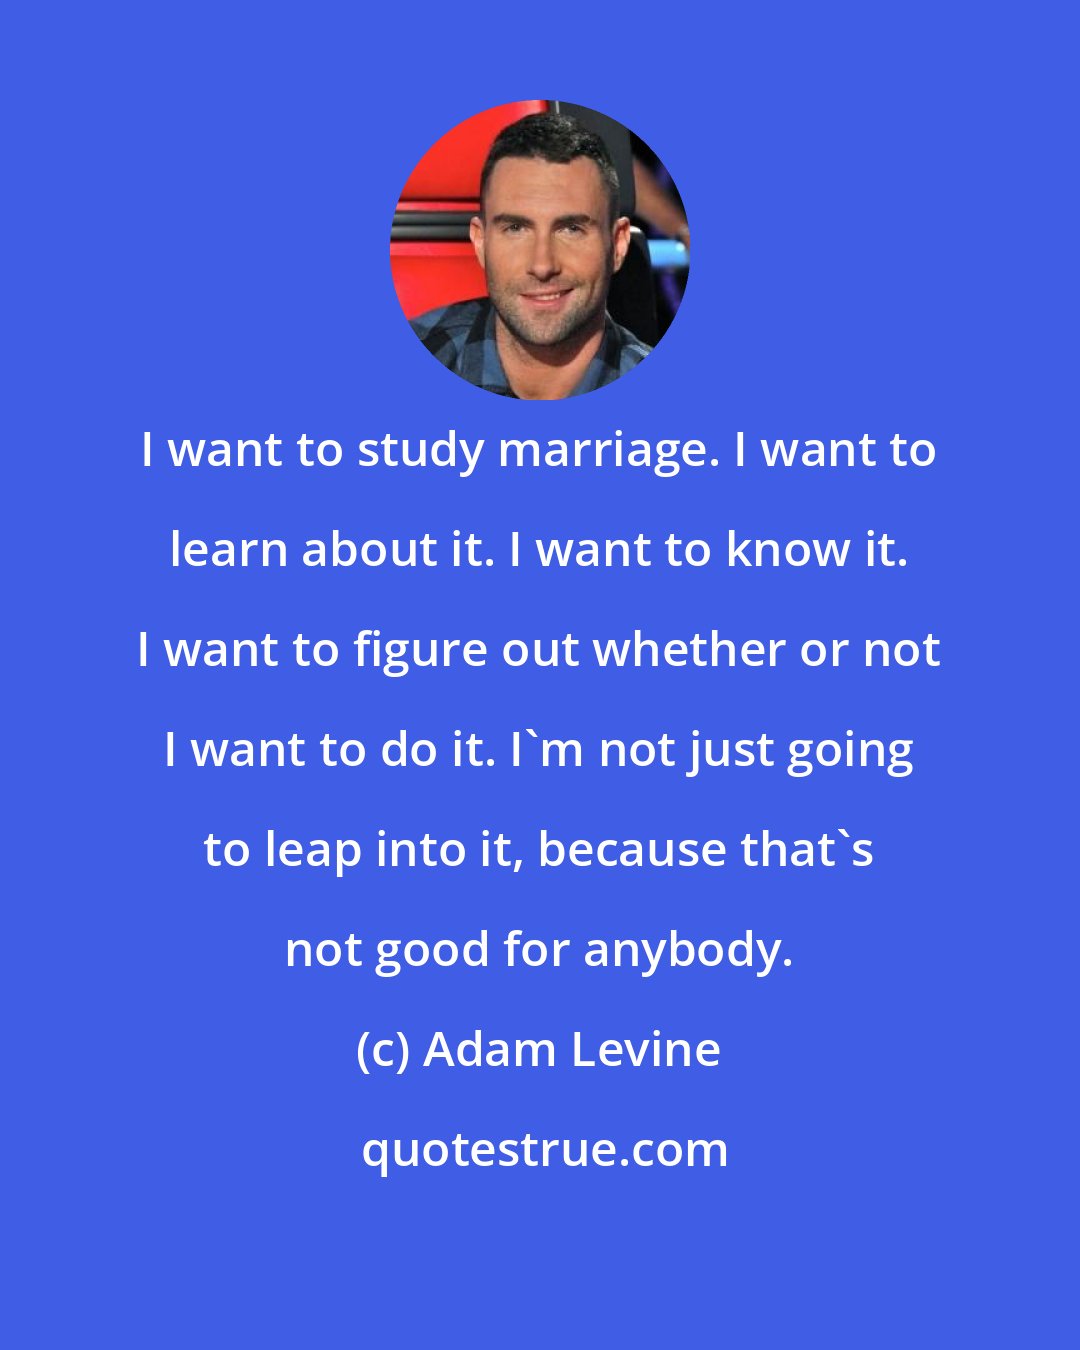 Adam Levine: I want to study marriage. I want to learn about it. I want to know it. I want to figure out whether or not I want to do it. I'm not just going to leap into it, because that's not good for anybody.